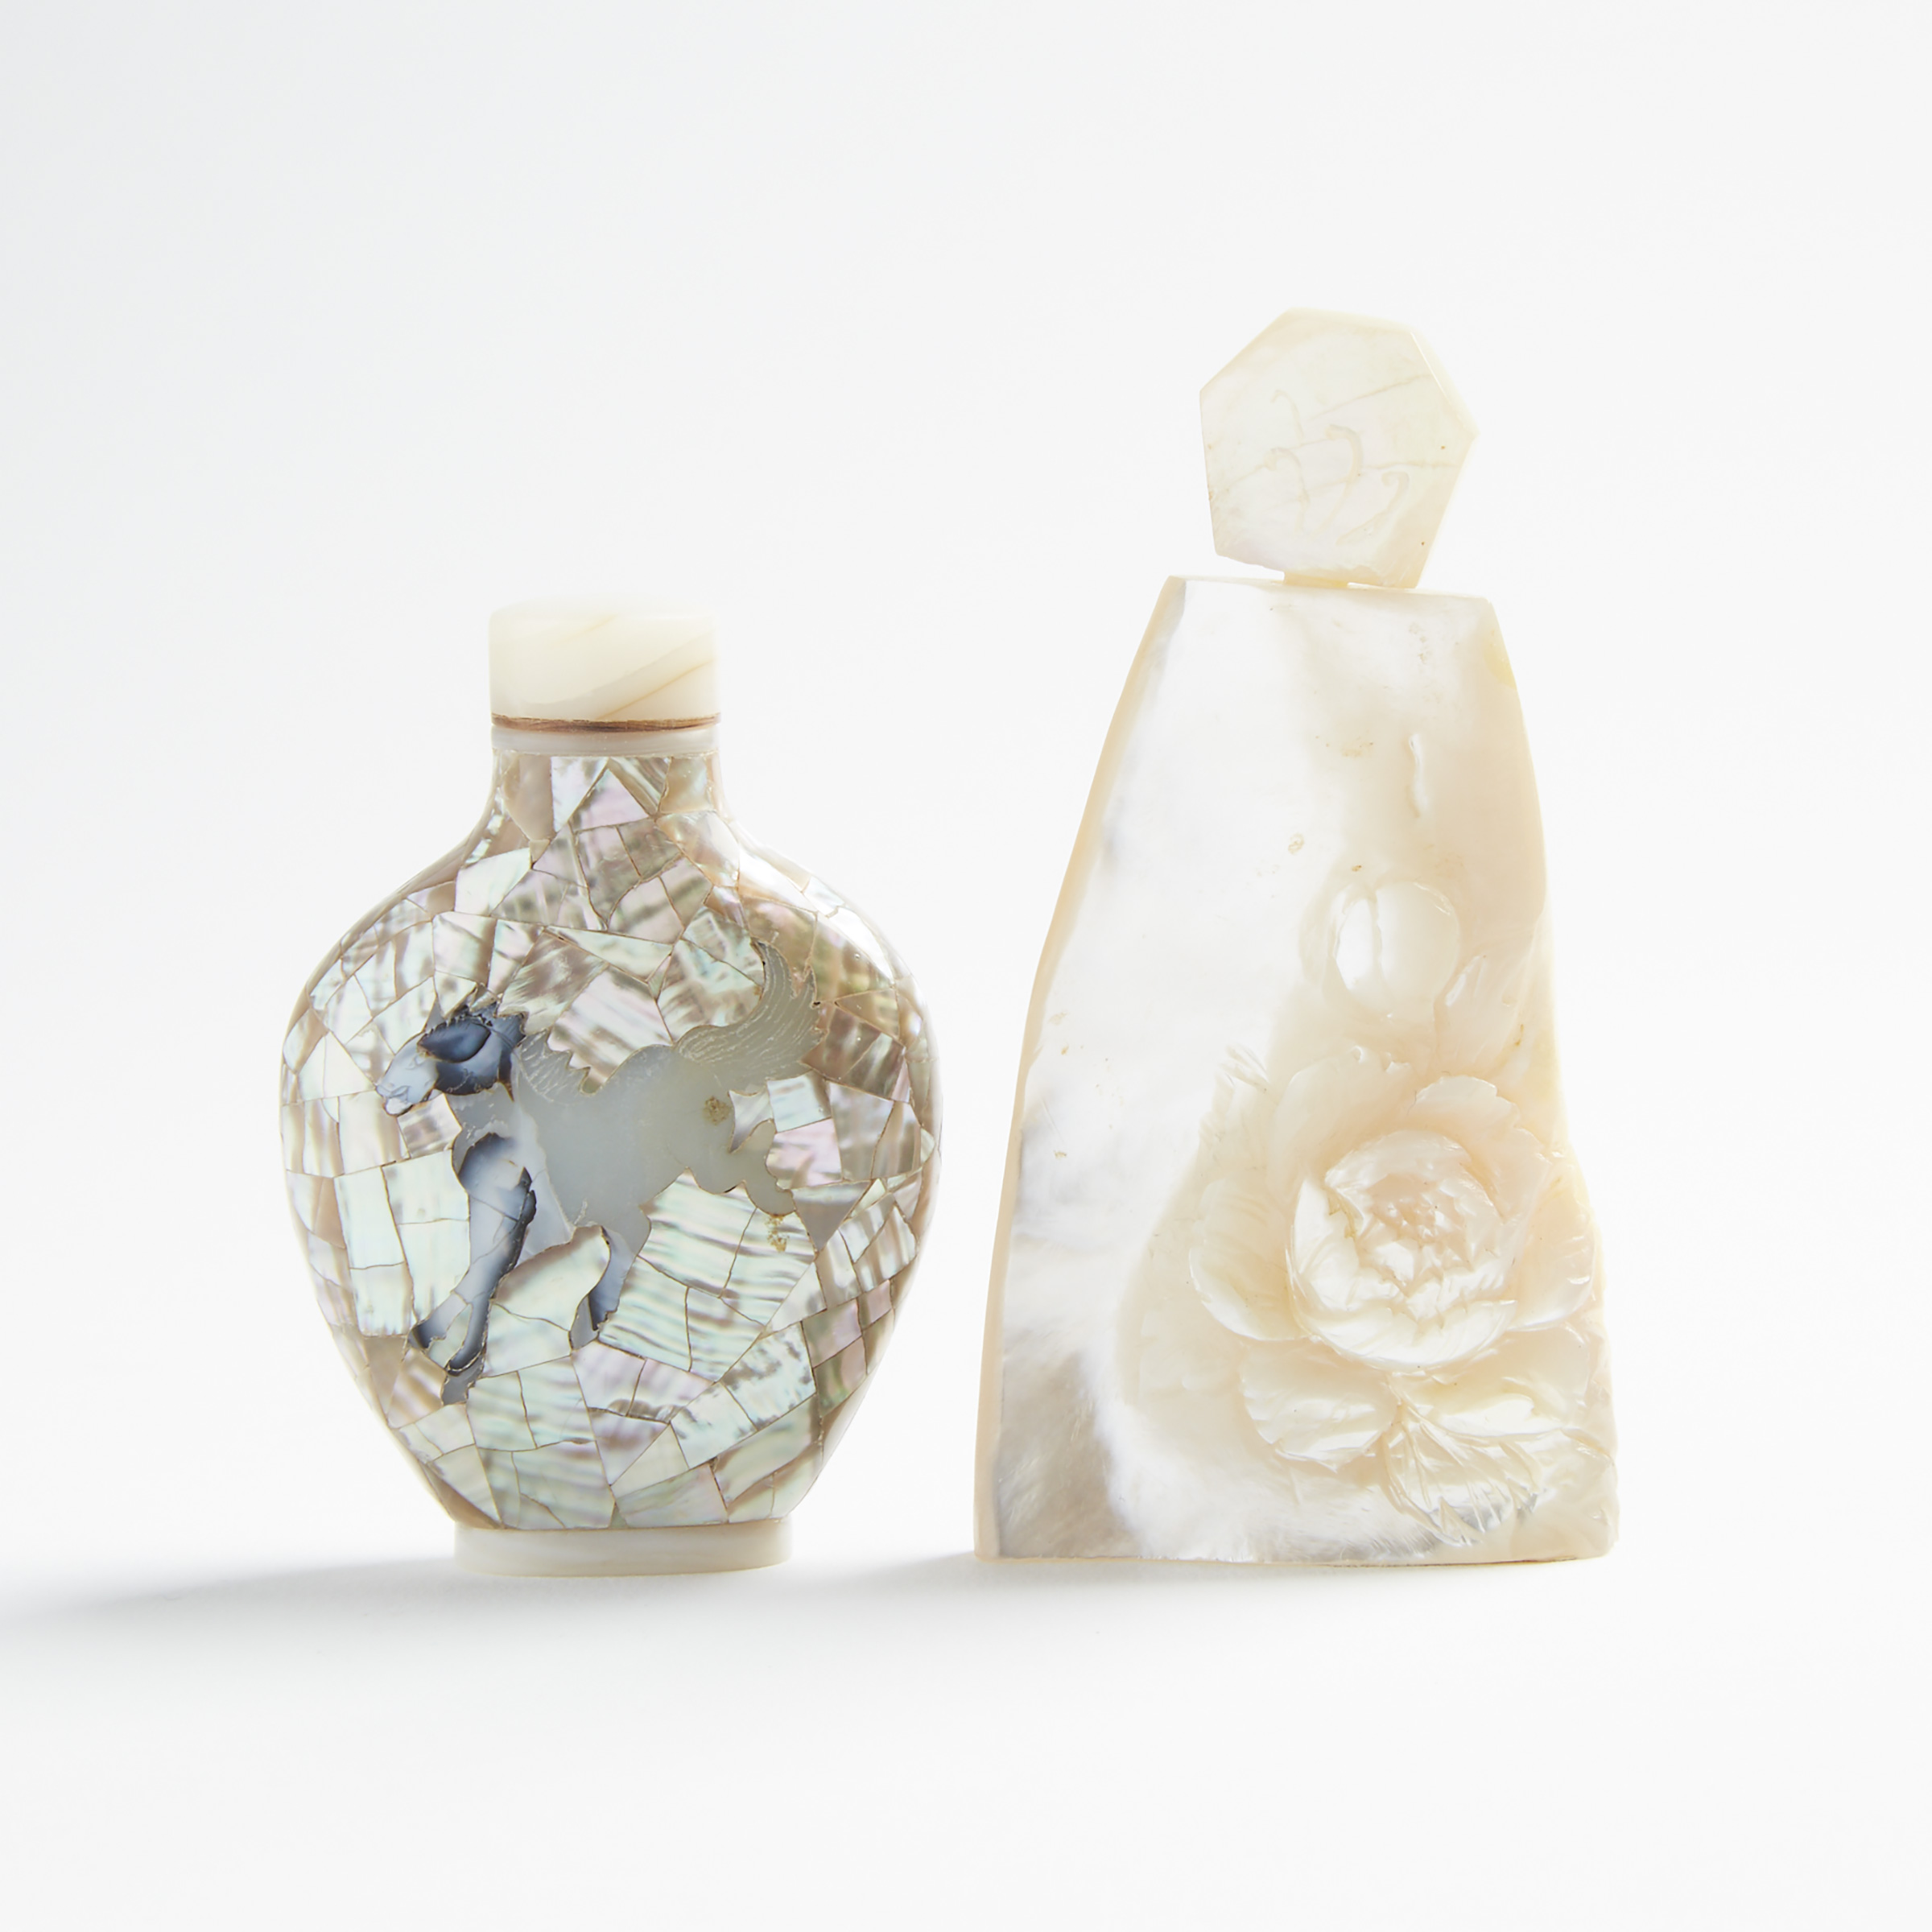 Two Mother-of-Pearl Snuff Bottles, 19th/20th Century